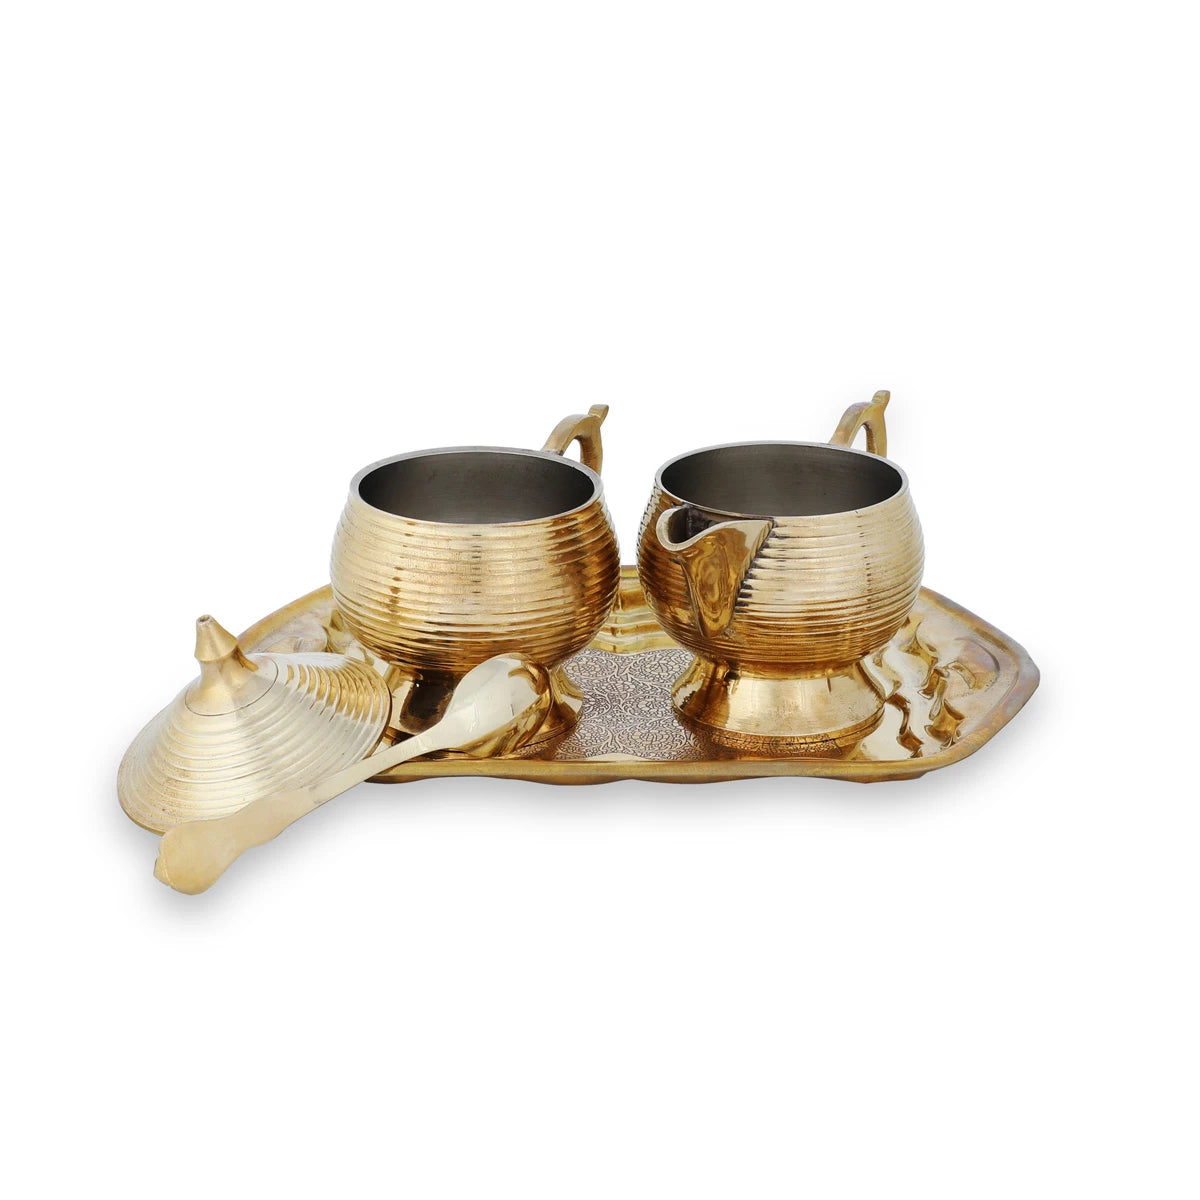 Front View of Shiny Golden Color Striped Brass Creamer Set - Showcasing Sugar Pot with Open Lid, Creamer Bowl, Spoon & Tray